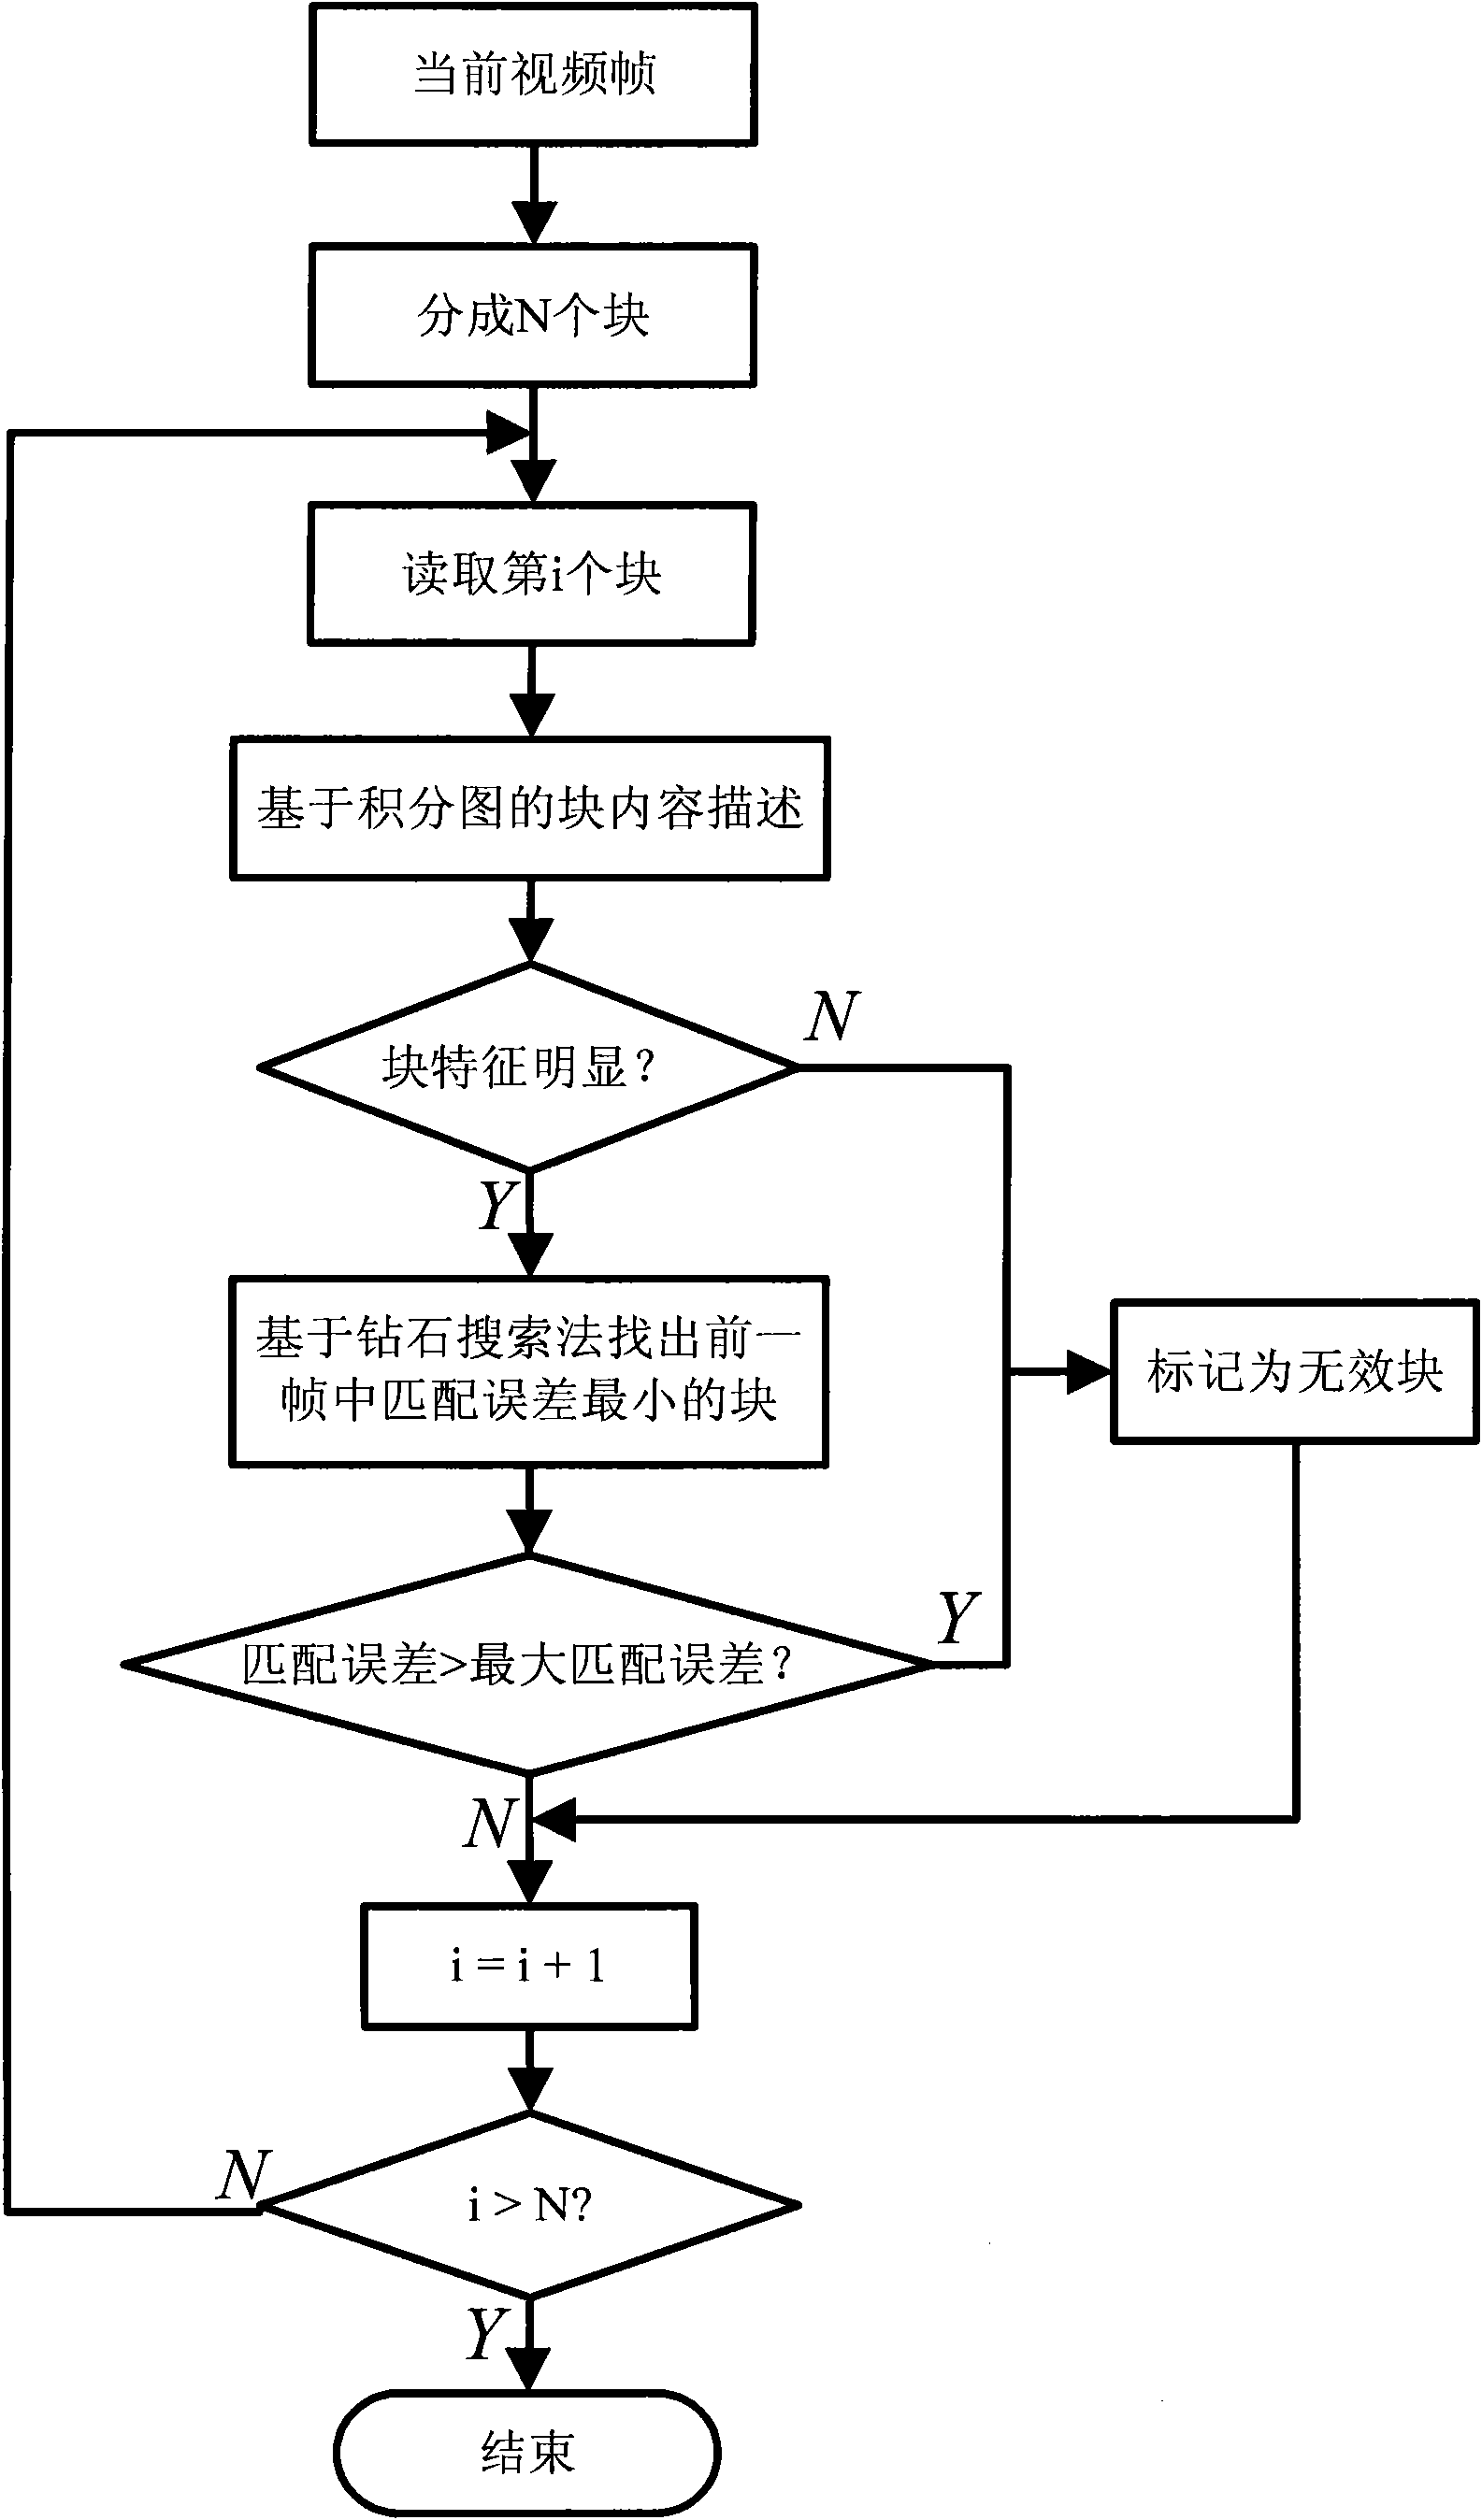 Real-time video image stabilizing method based on integral image characteristic block matching